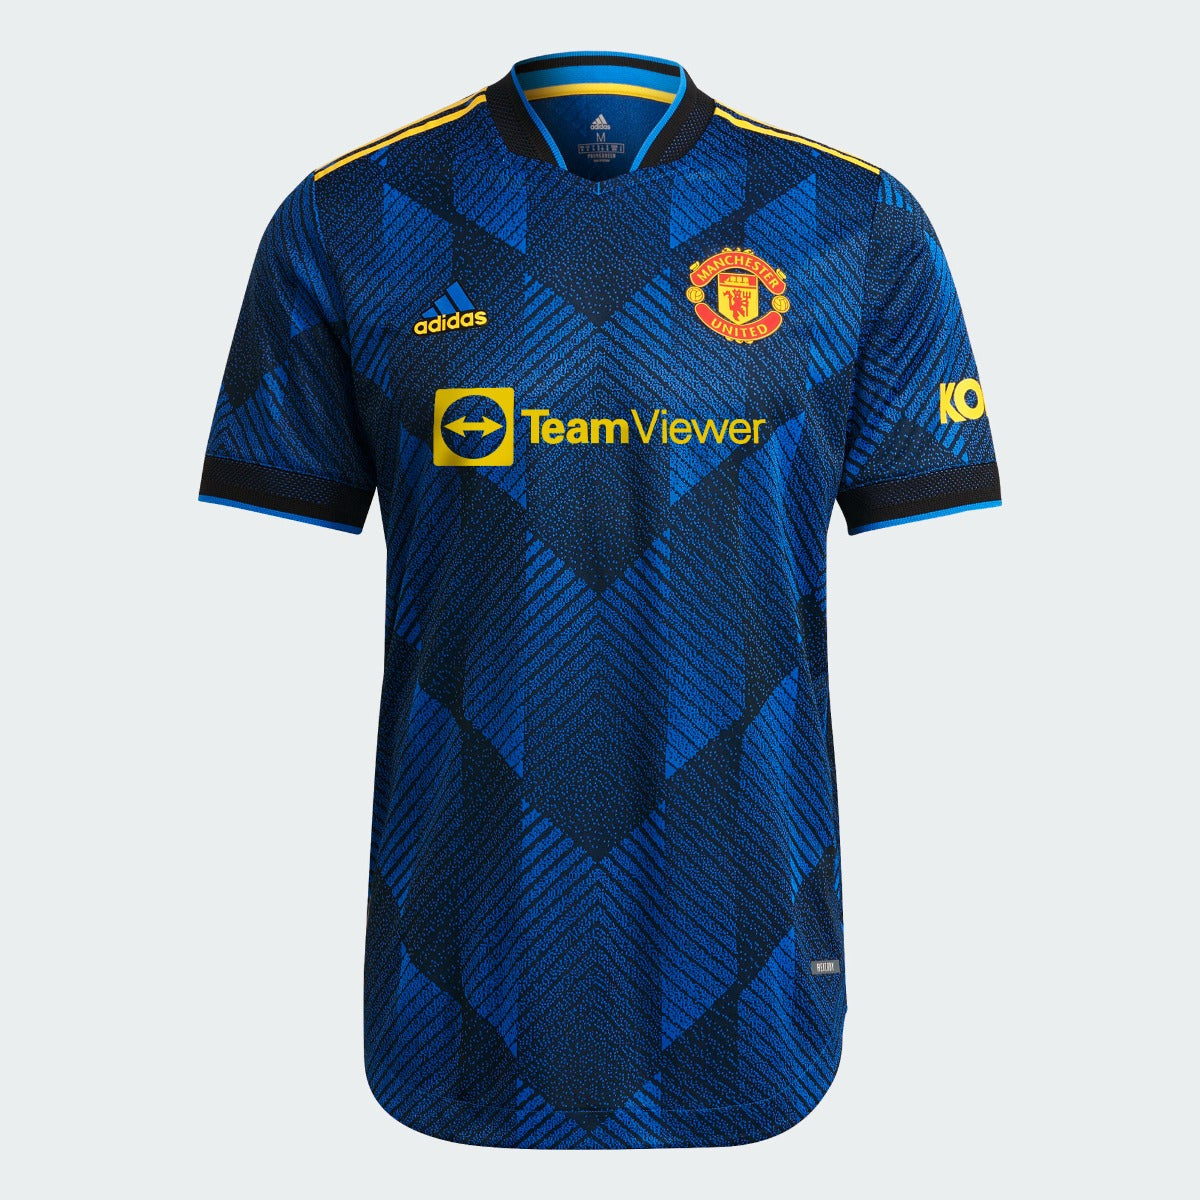 Adidas 2021-22 Manchester United Third Authentic Jersey - Glow Blue-Yellow (Front)